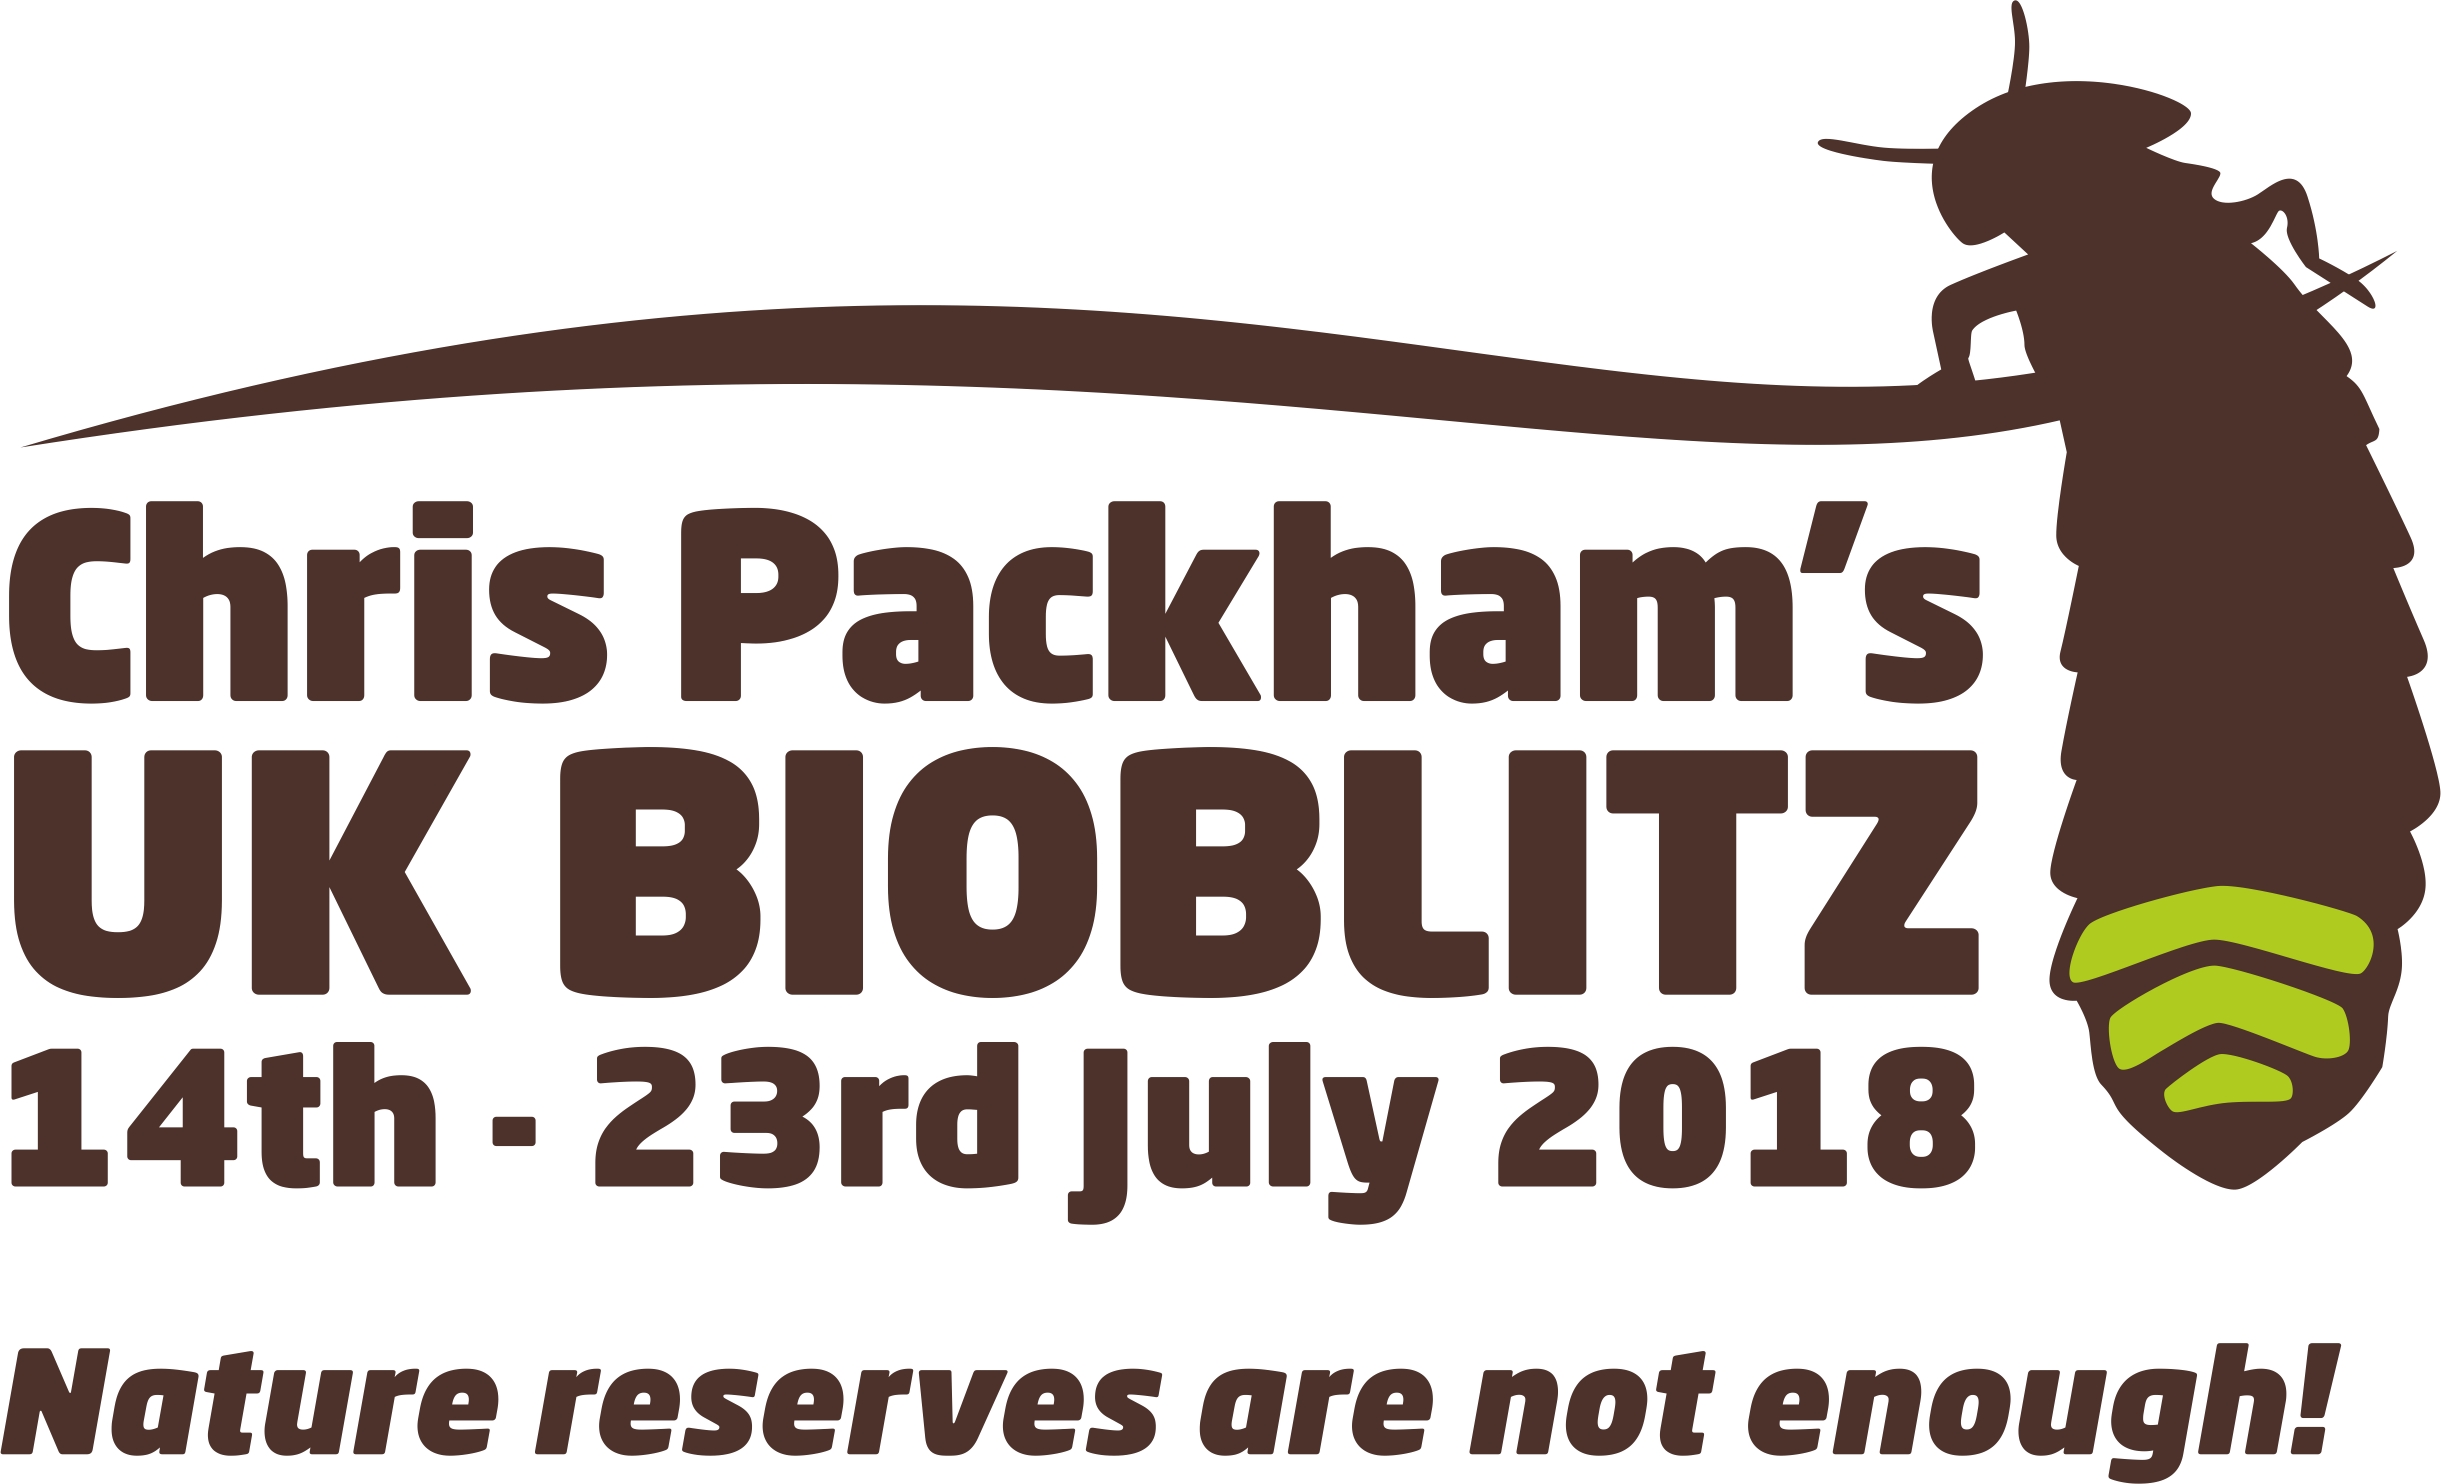 Chris Packhams Bioblitz Campaign is Coming to The Crescent